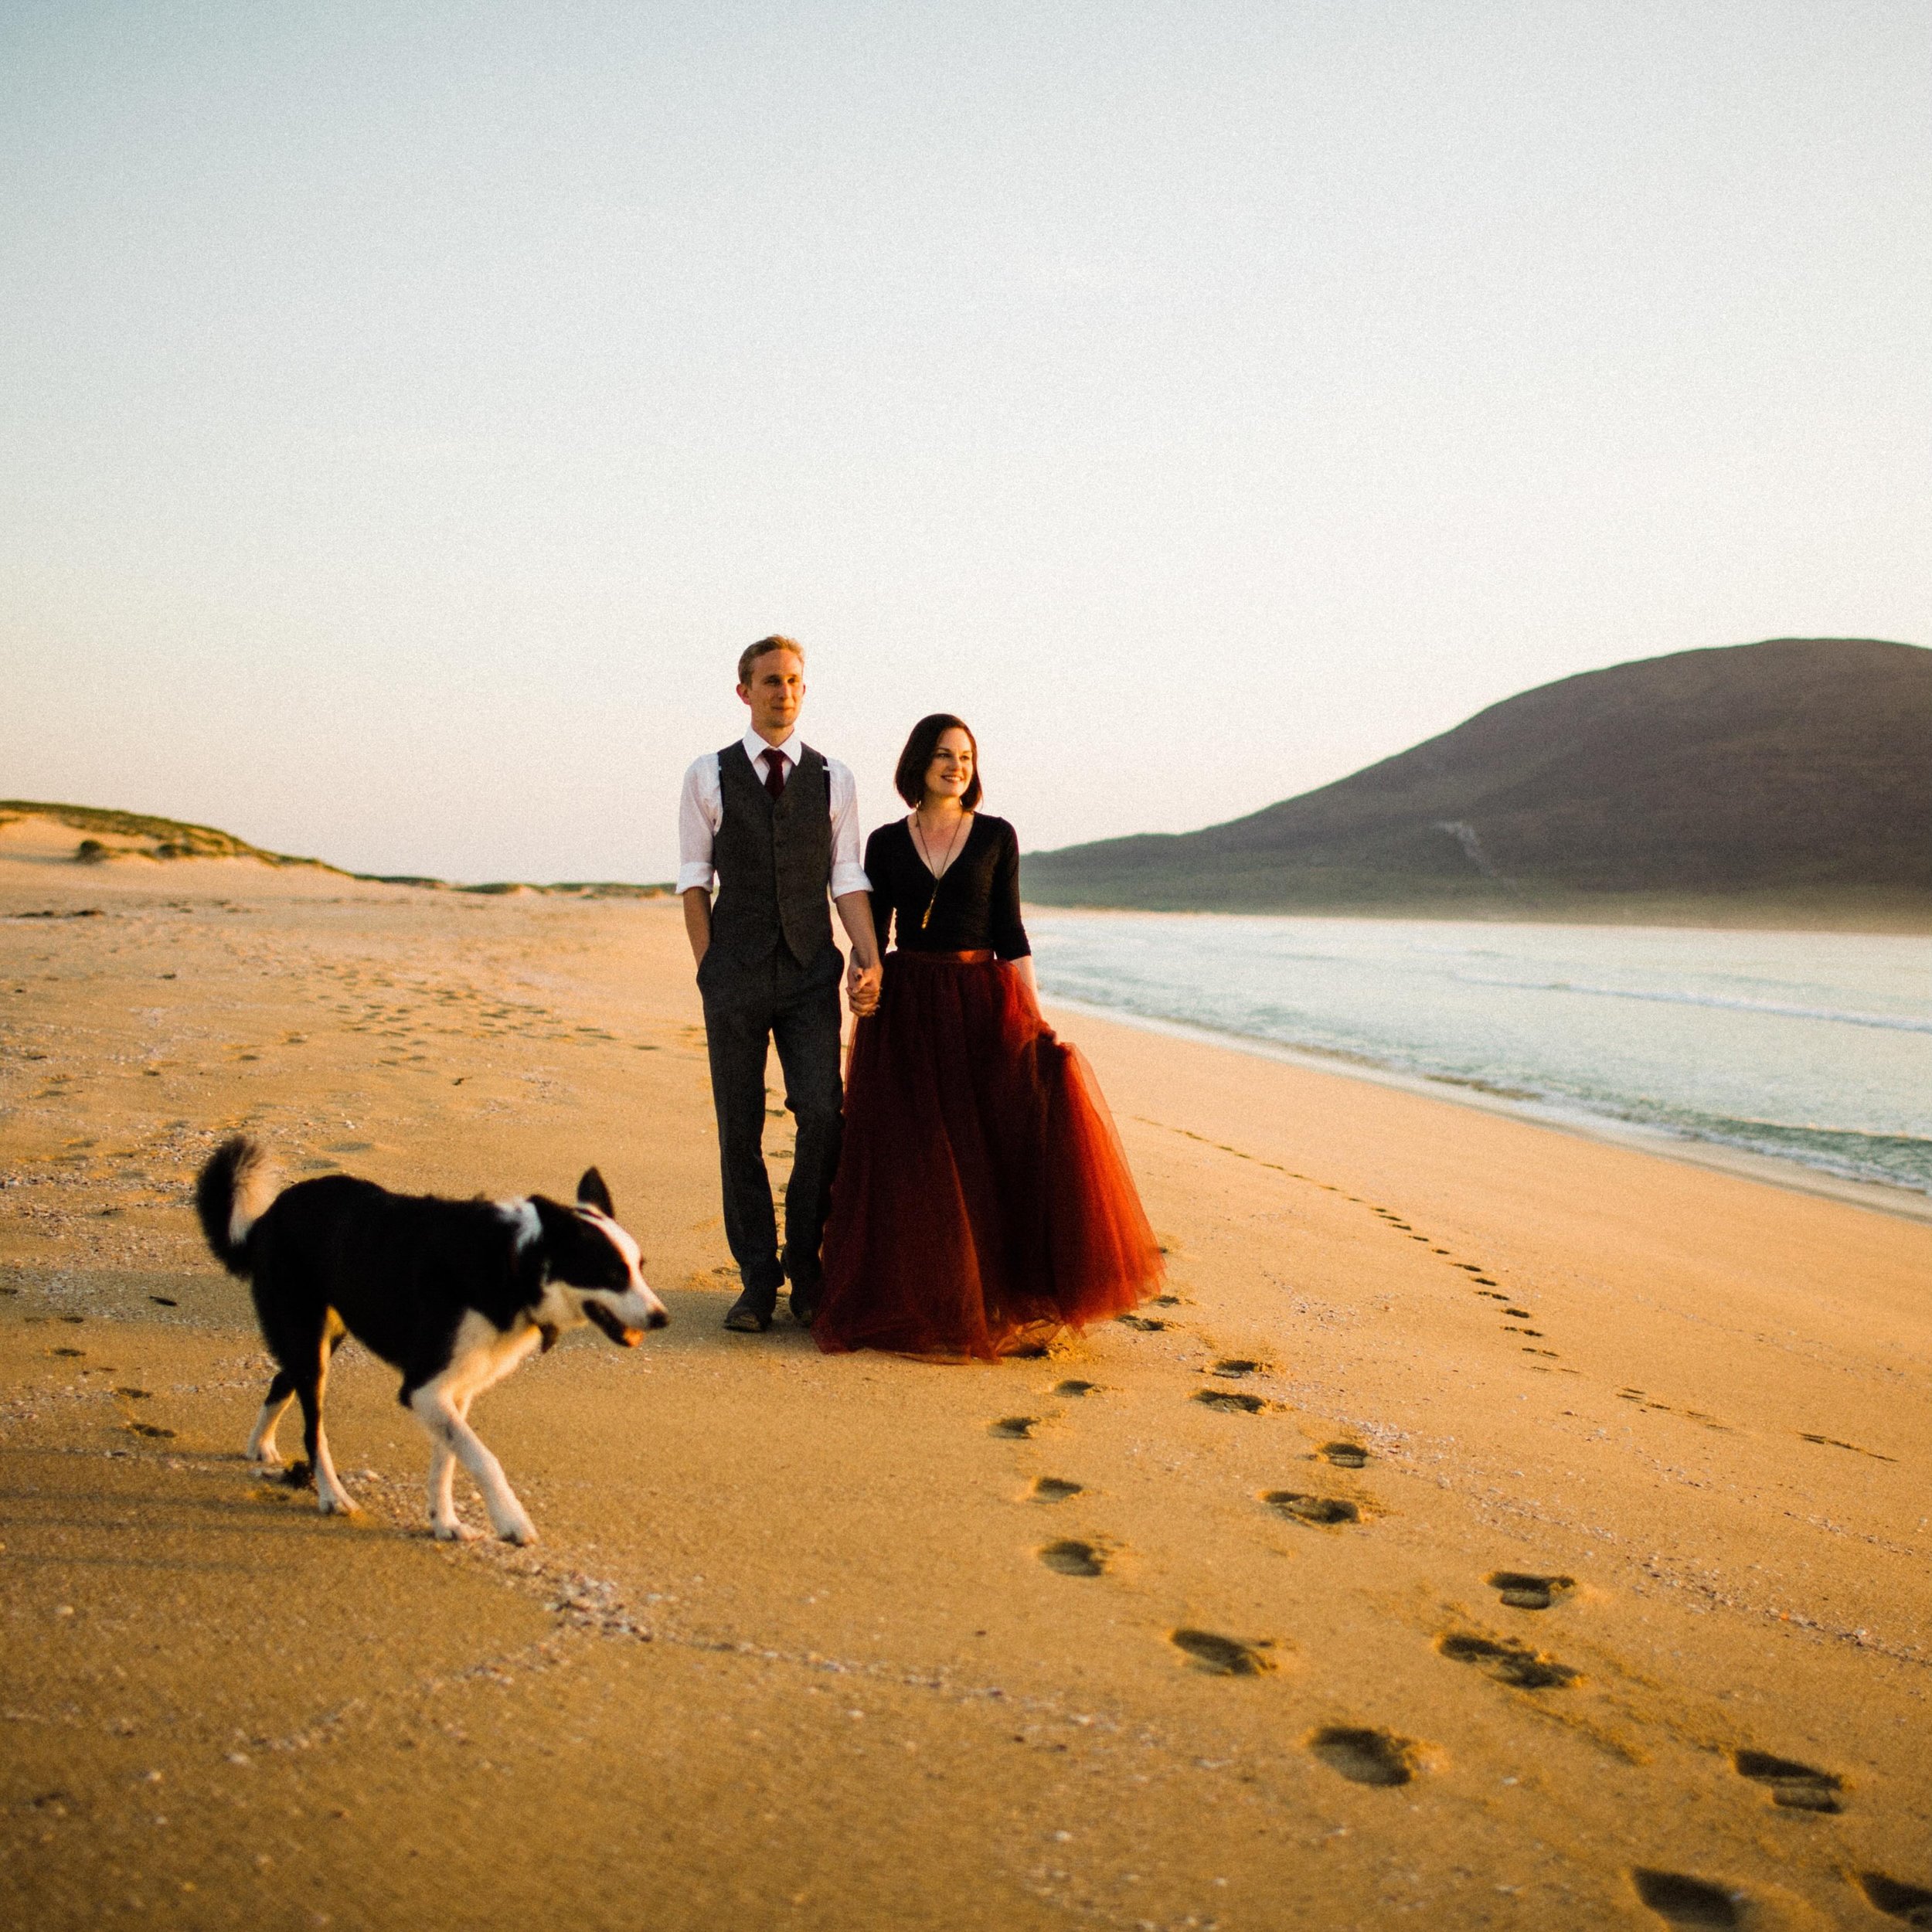 Scottish beaches &amp; alternative wedding dresses &hearts;️. I adore documenting weddings that are everything YOU&rsquo;VE wanted them to be - if you want to wear a stunning white gown, I love it. If you want to wear a green shirt dress, I love it! 